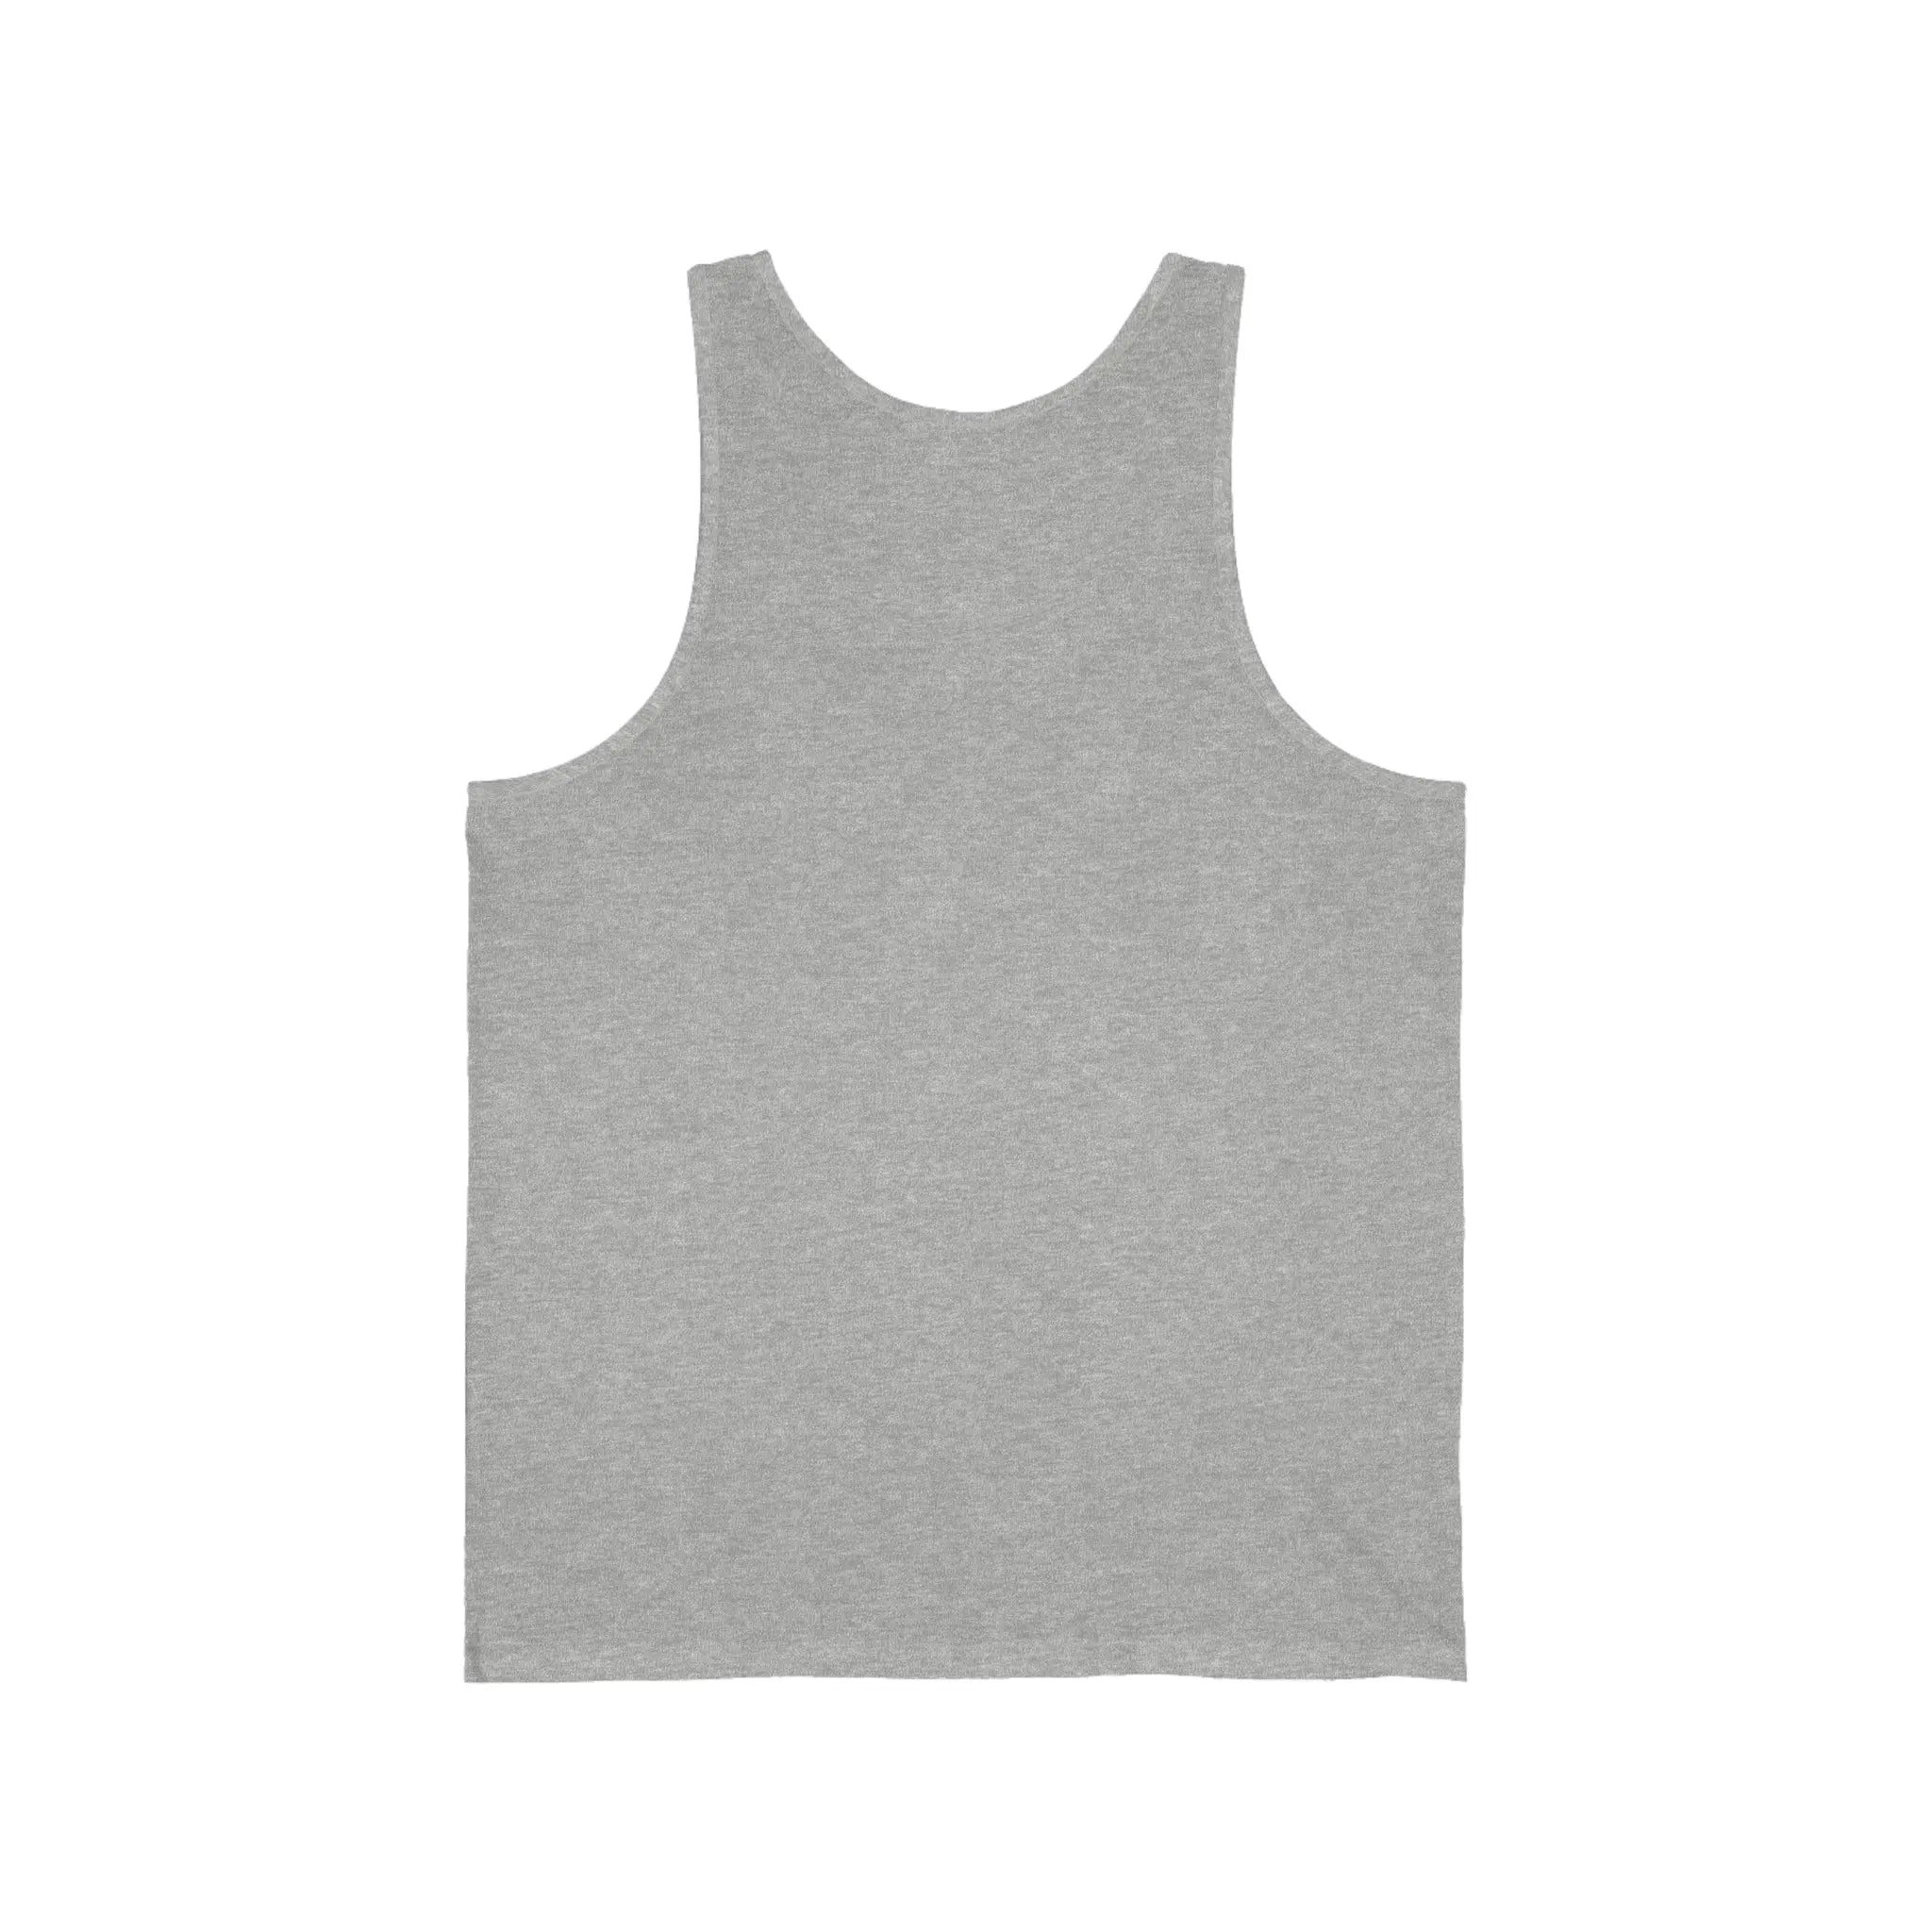  G is for Groove (Black and White) Relaxed Fit Jersey Tank Tank Top